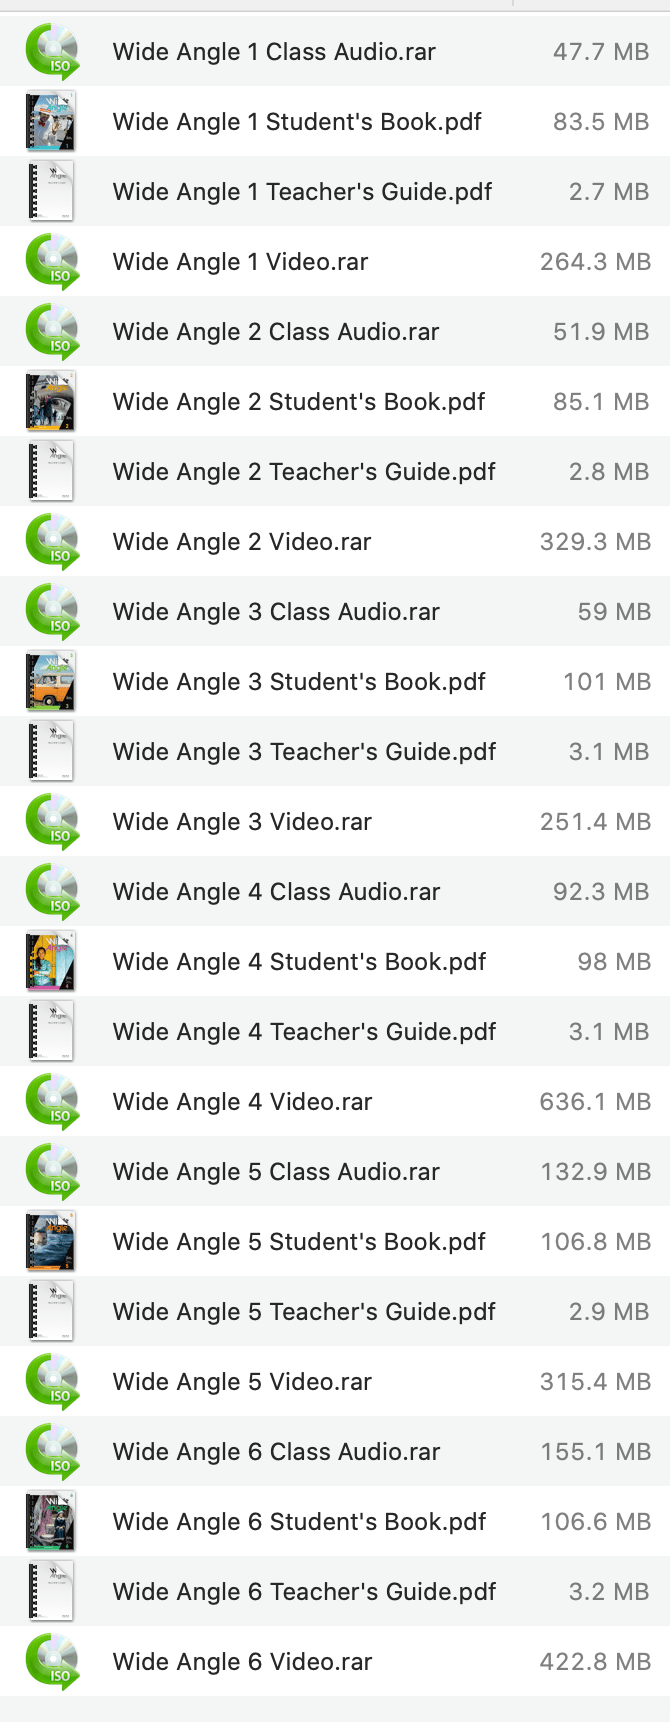 Download Ebook Wide Angle (6 Levels) Pdf Audio Video full